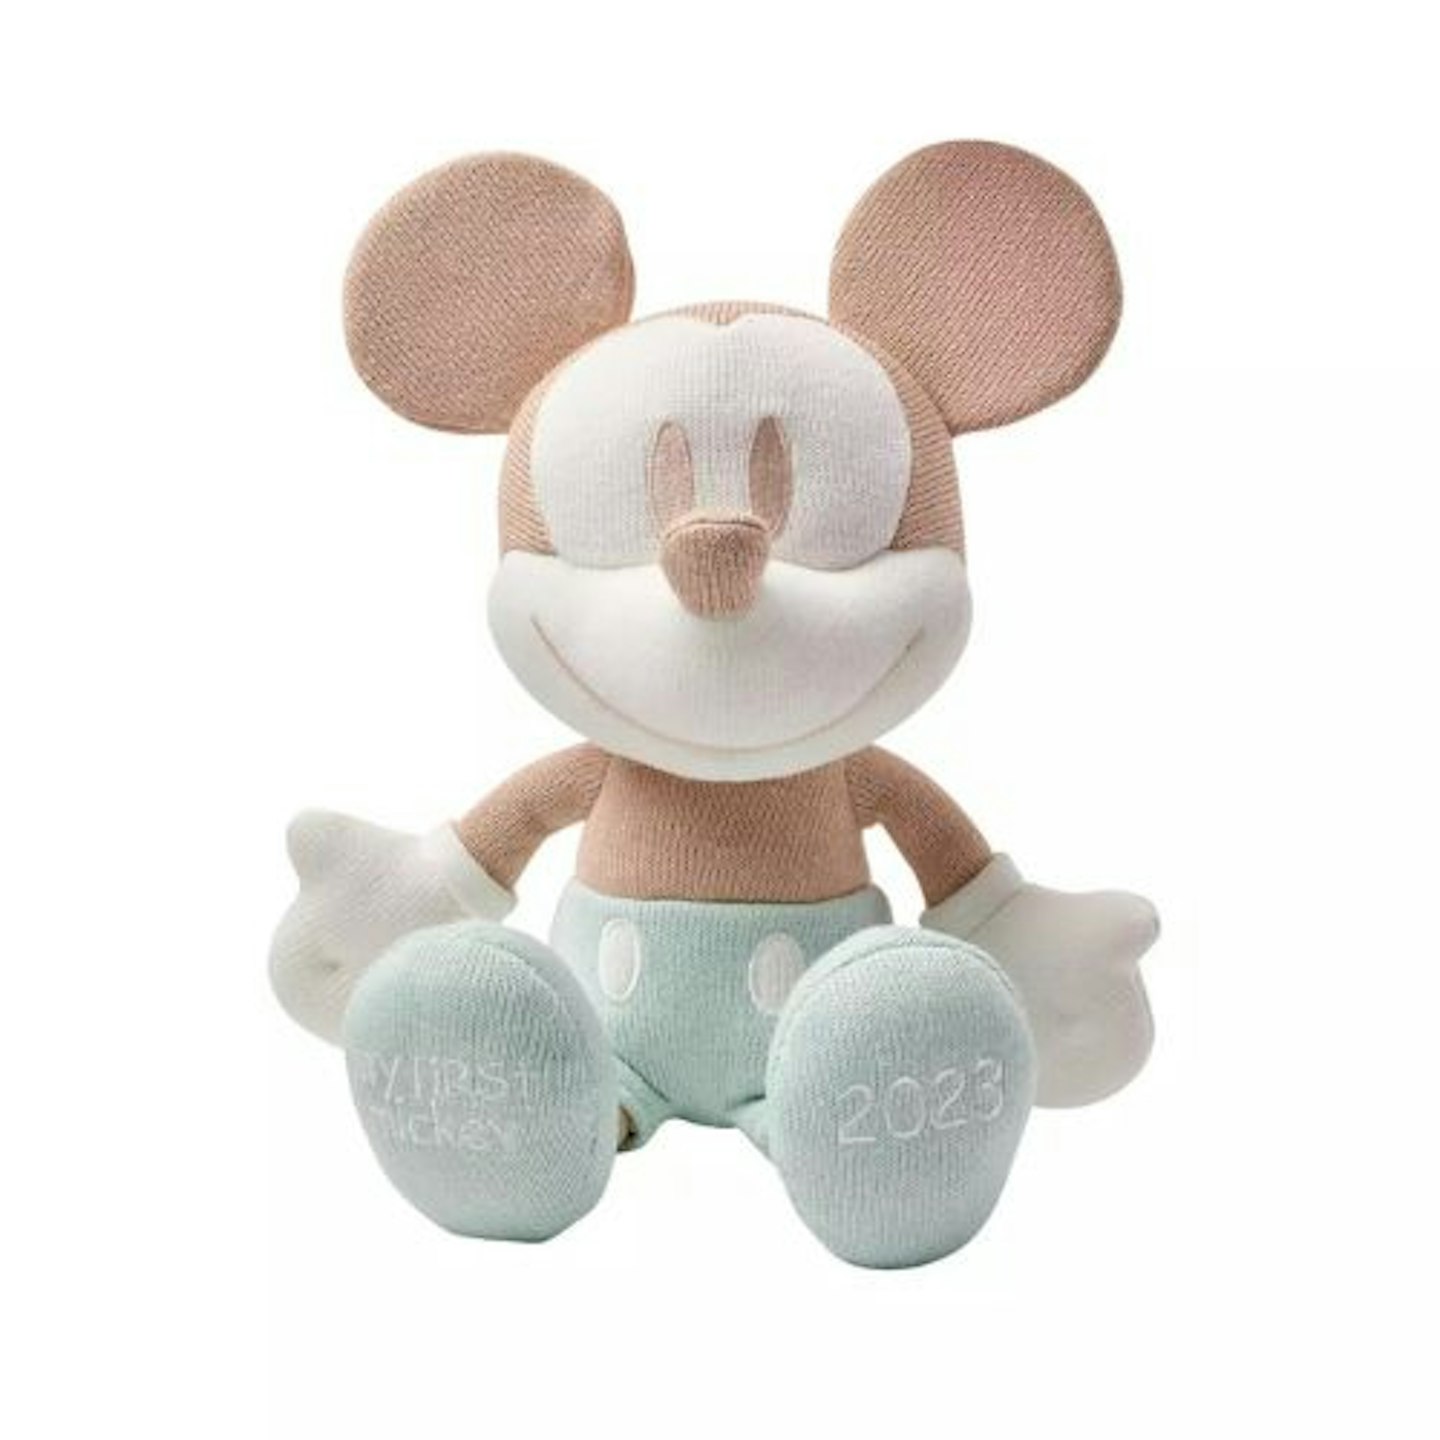 Best newborn gifts Disney Store My First Mickey 2023 Small Soft Toy